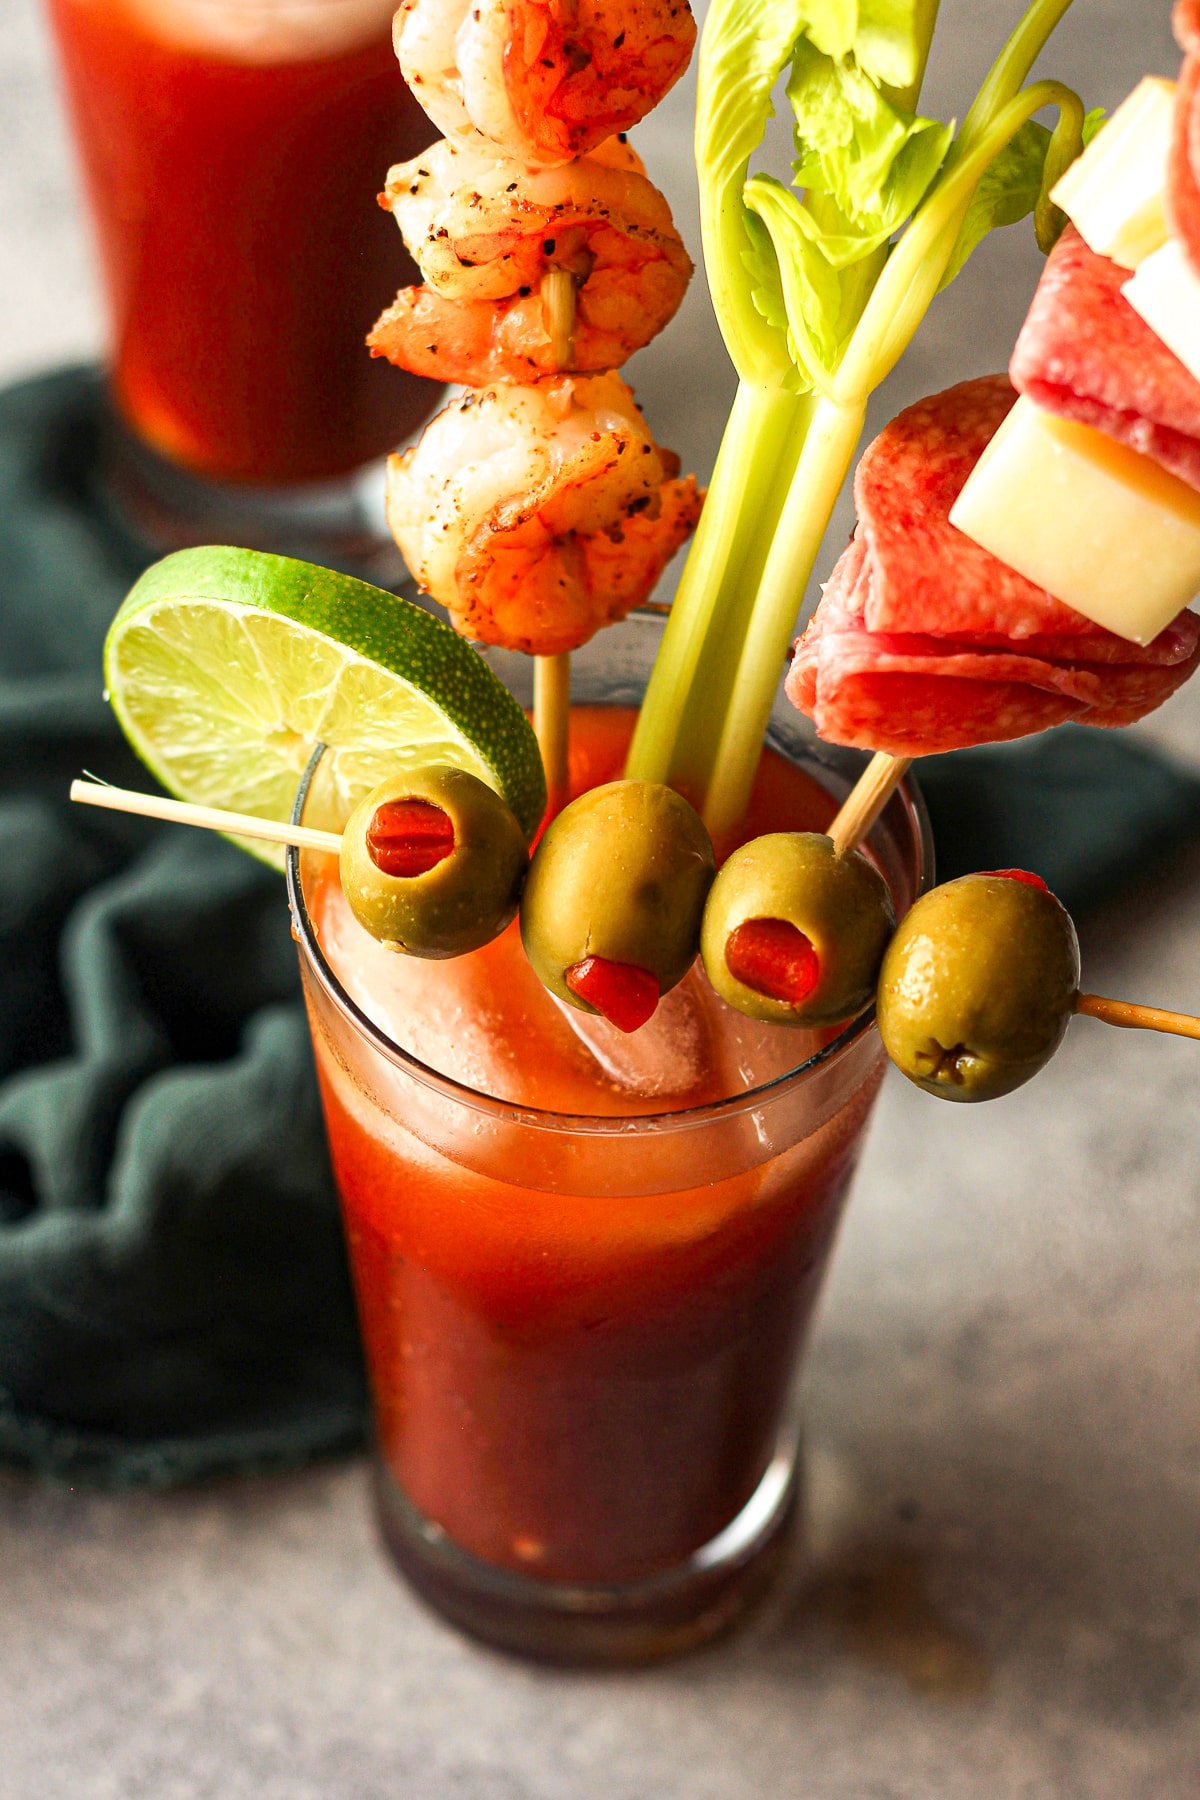 Overhead view of a spicy Bloody Mary with garnishes.